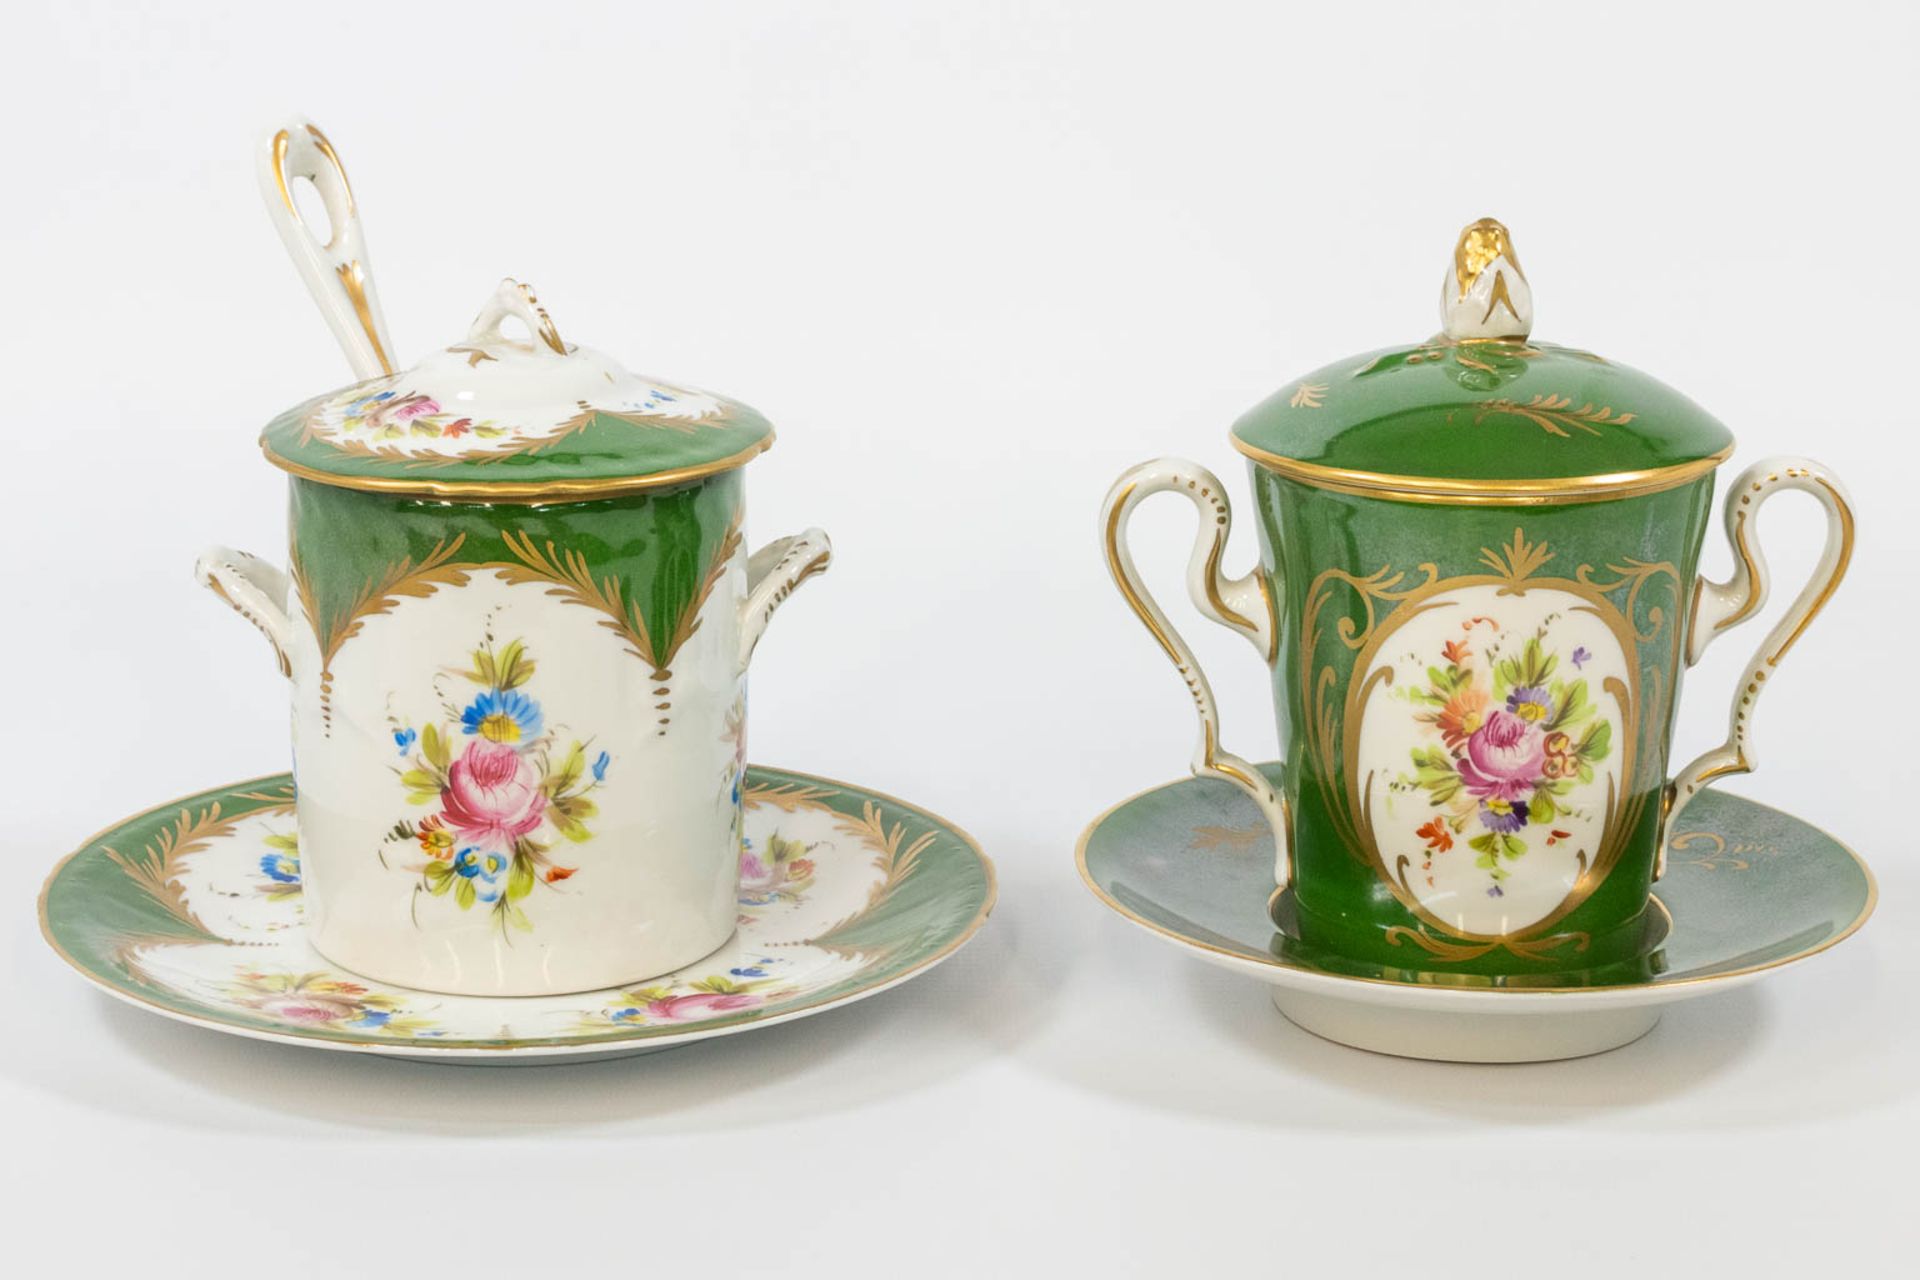 A tremble cup and sugarpot, made of hand-painted porcelain with a flower decor and marked JD Limoges